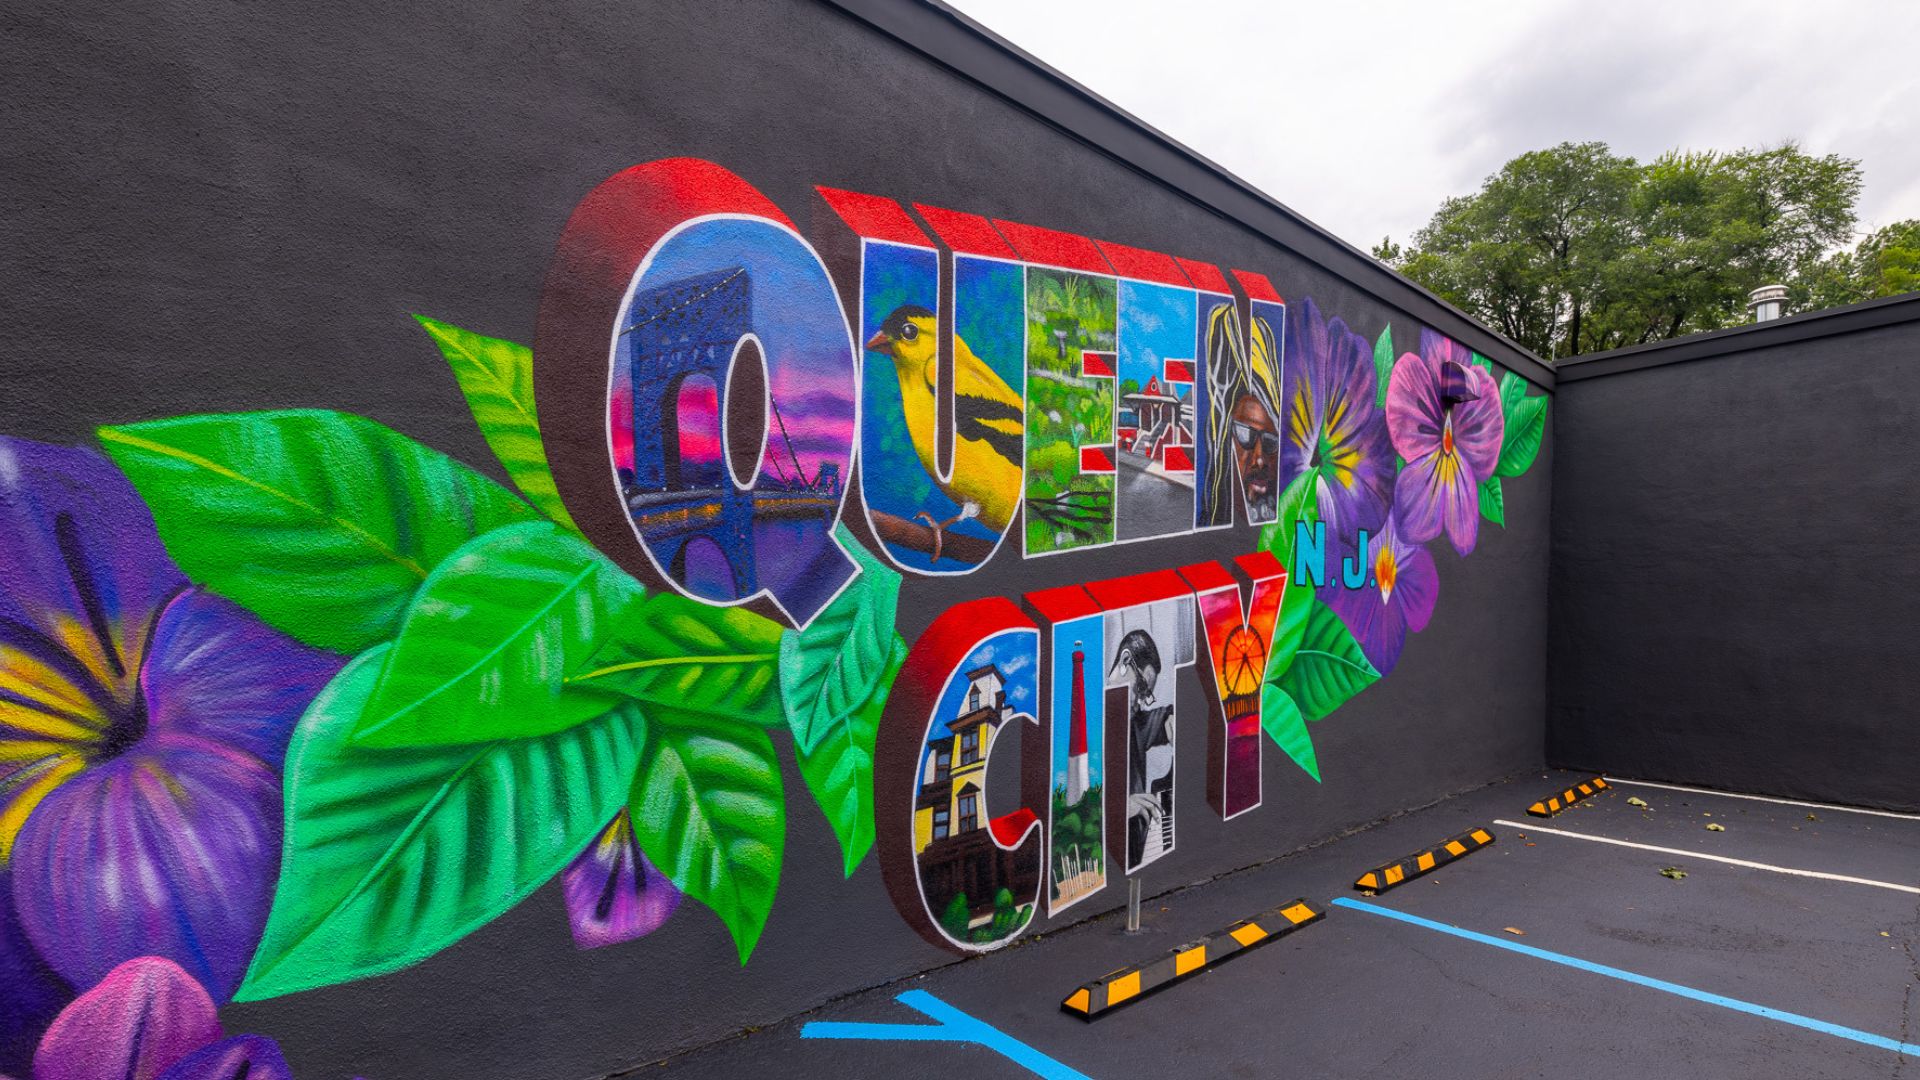 The Queen City mural uplifts local community in Plainfield, NJ. The words "Queen City" are spelled out against a black background. Each letter features a different aspect of New Jersey, Union County, and Plainfield.